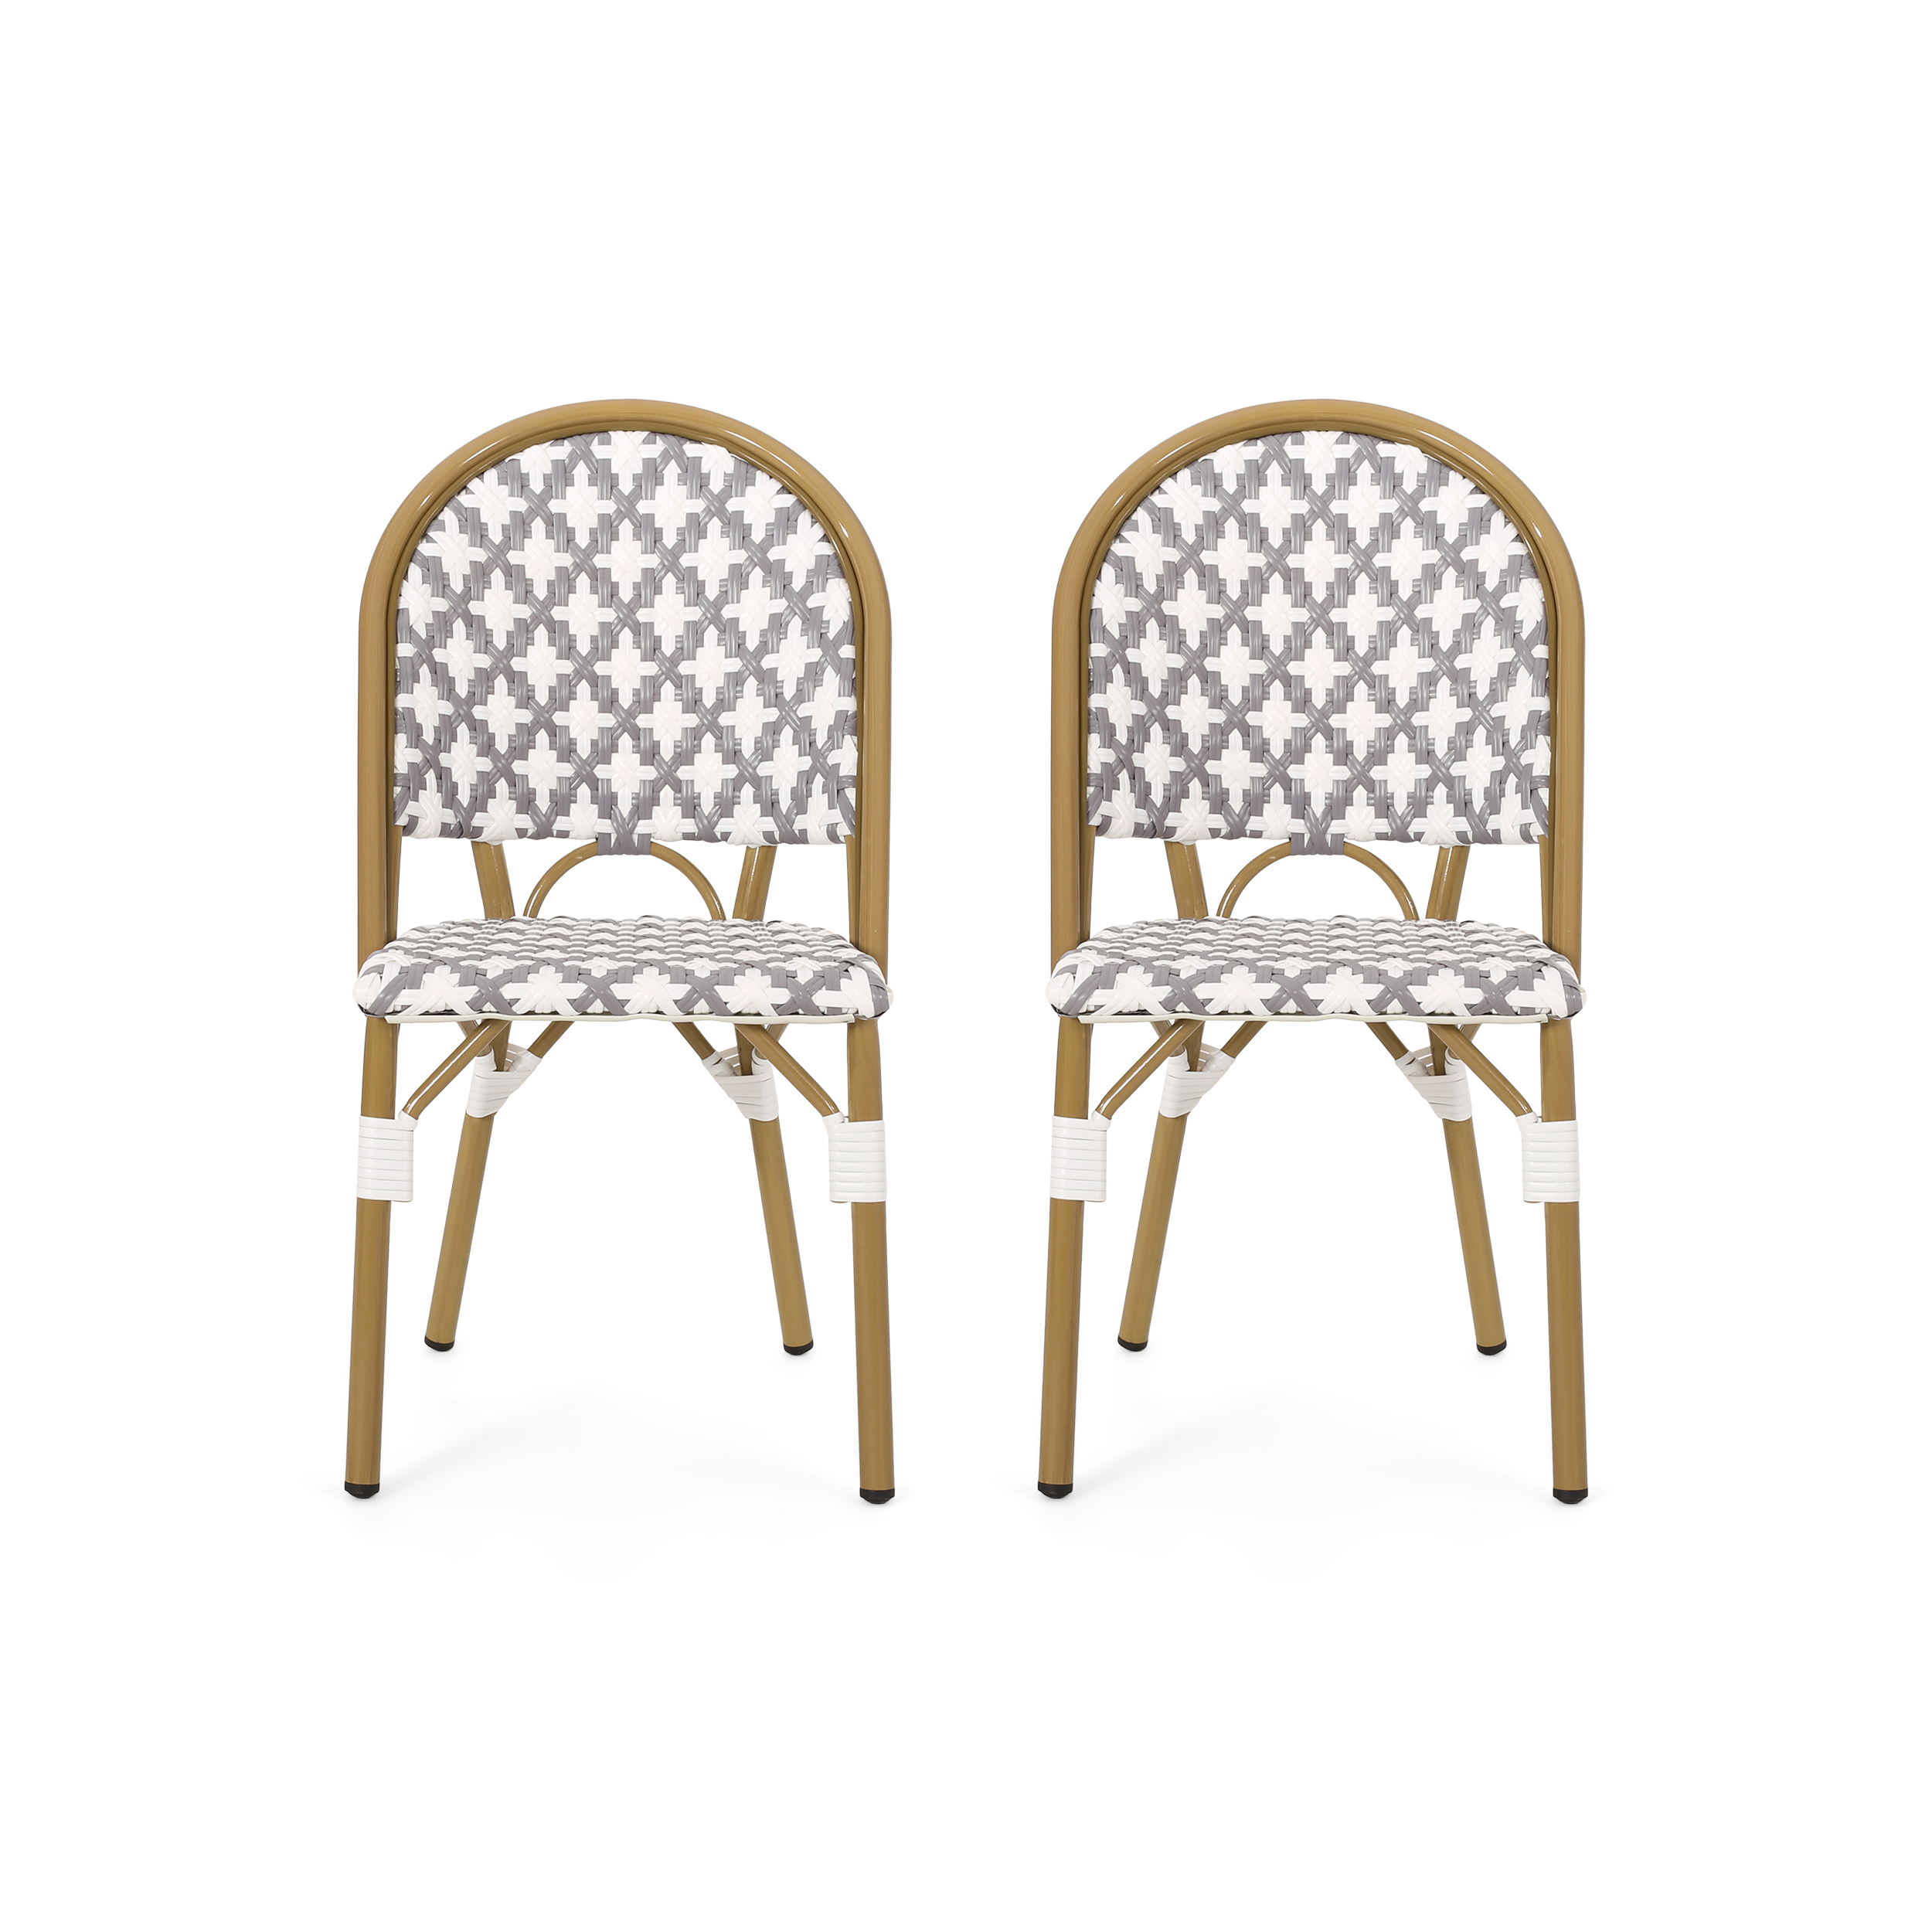 Brandon Outdoor French Bistro Chair, Set of 2, Gray, White, Bamboo Finish - image 1 of 8